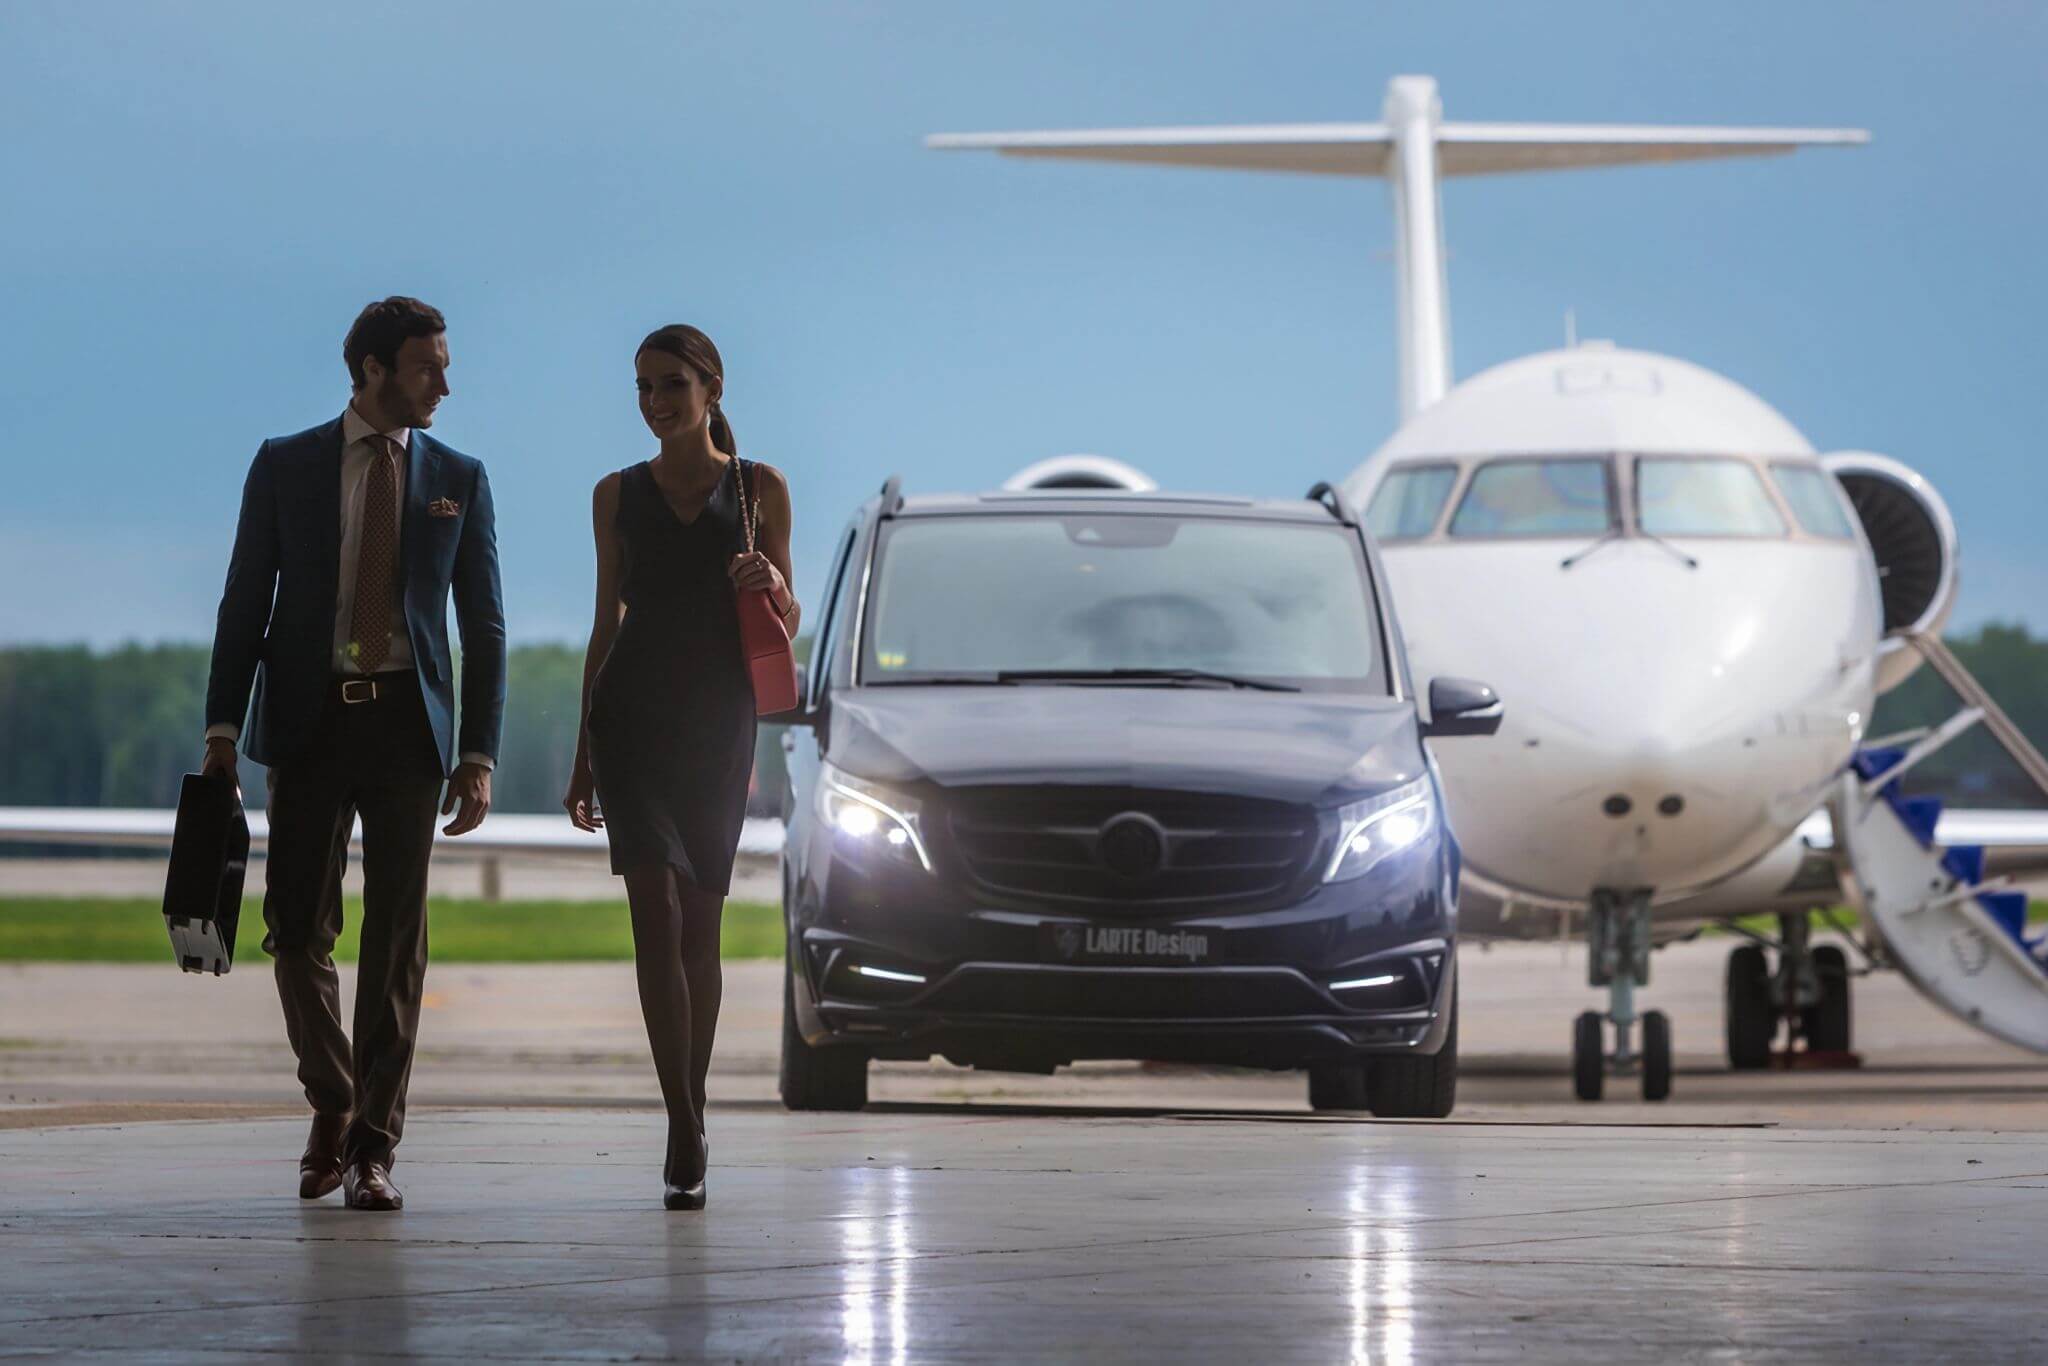 Airport Transfer Service - Ride for Cheap